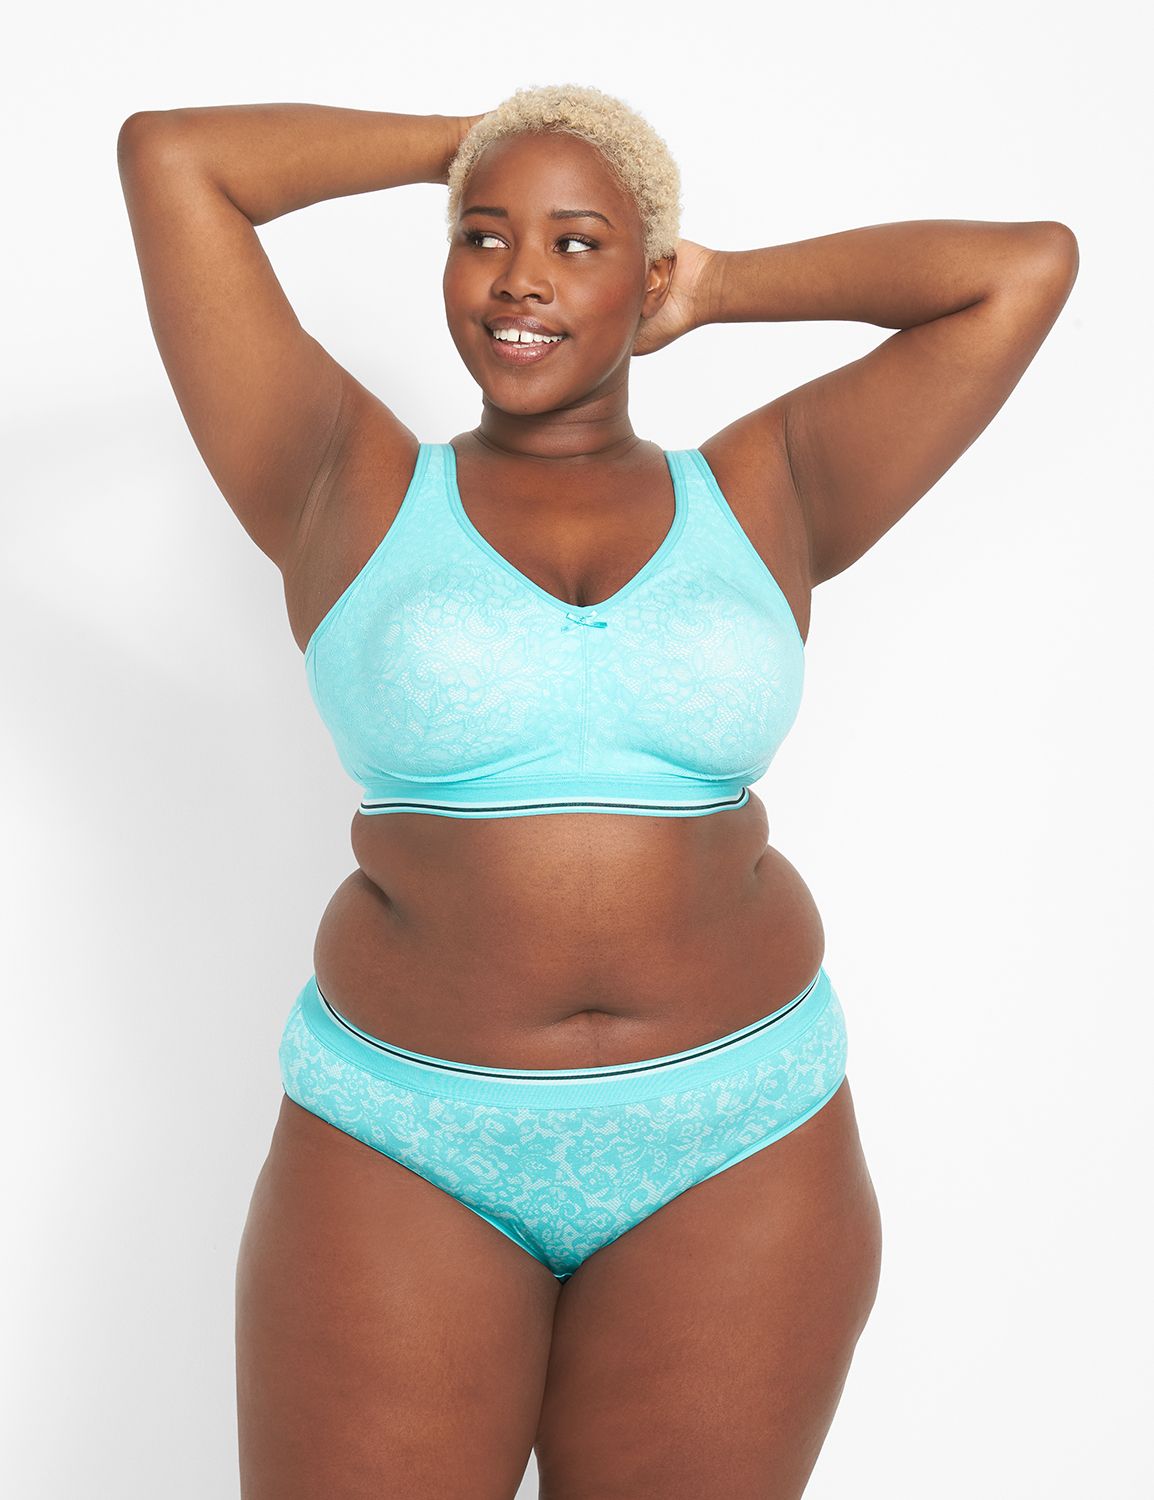 Savage X Fenty Lingerie & Loungewear Try-On Haul: A Plus Size Review